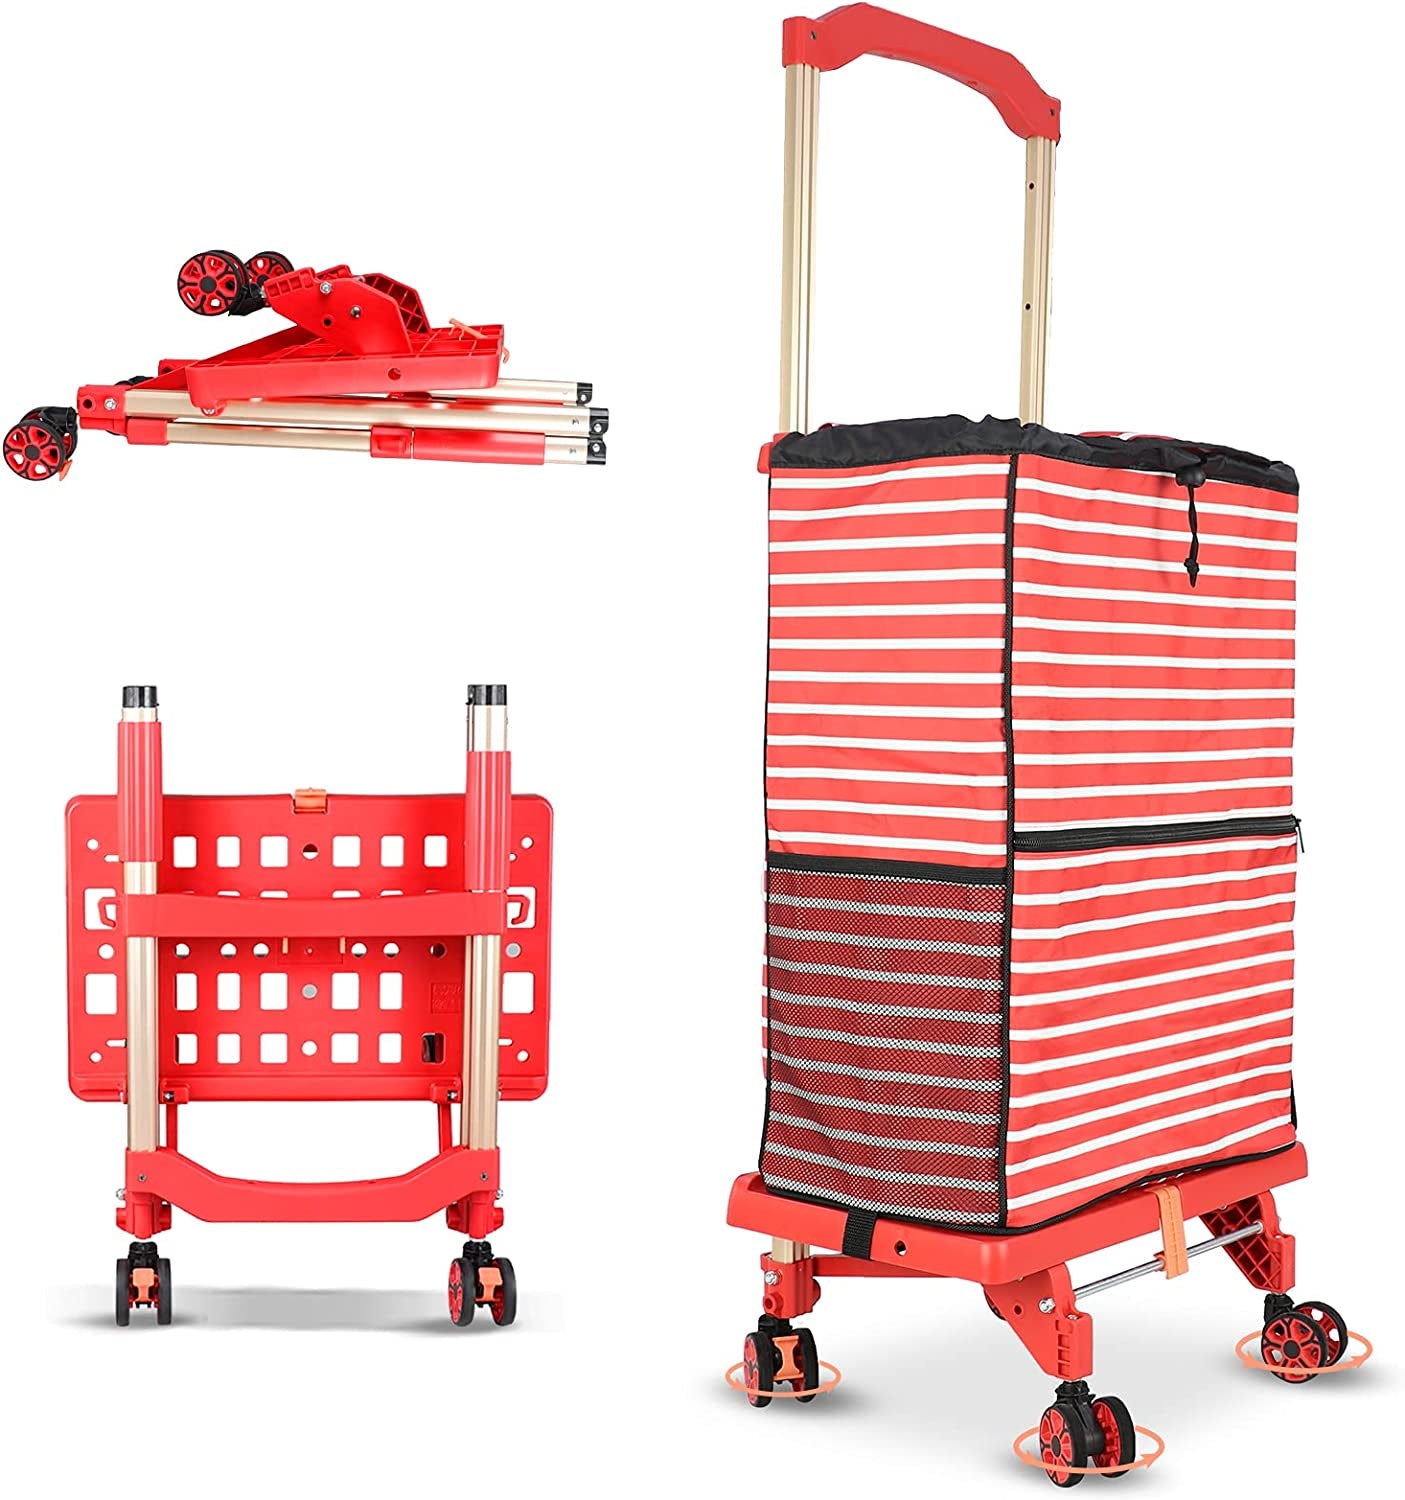 FELICON, Folding Hand Truck Portable Dolly Utility Cart Rolling Crate with 4 Rotate Wheels 80Kg/176Lbs Heavy Duty Handcart Removable Bag Telescoping Handle for Moving Shopping Grocery Office Use(Red&White)